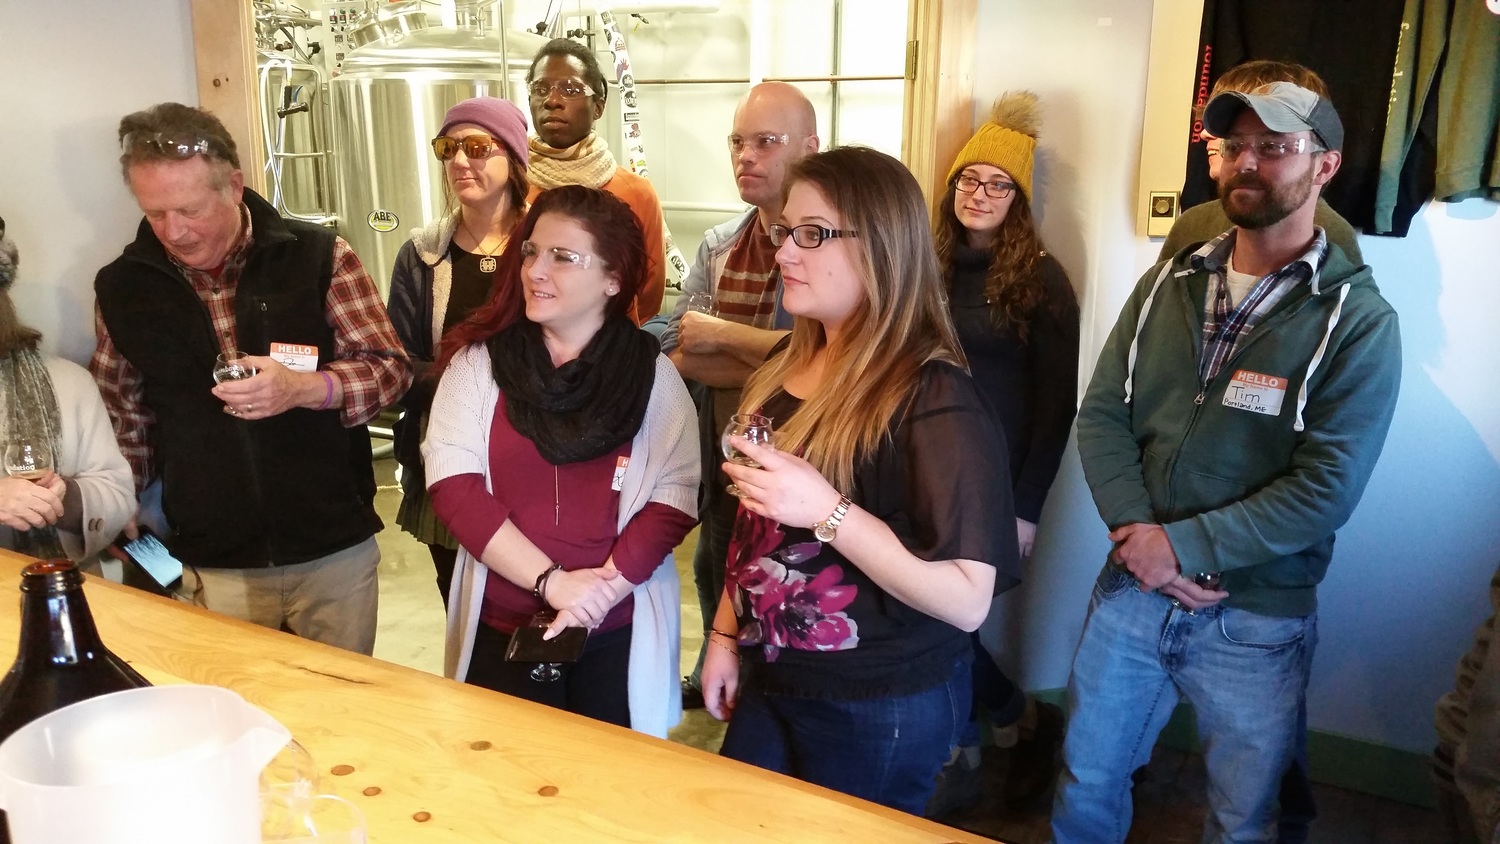  The Andy's group listens to Foundation Brewing's Adam Stein describe the company and the beers.&nbsp; 